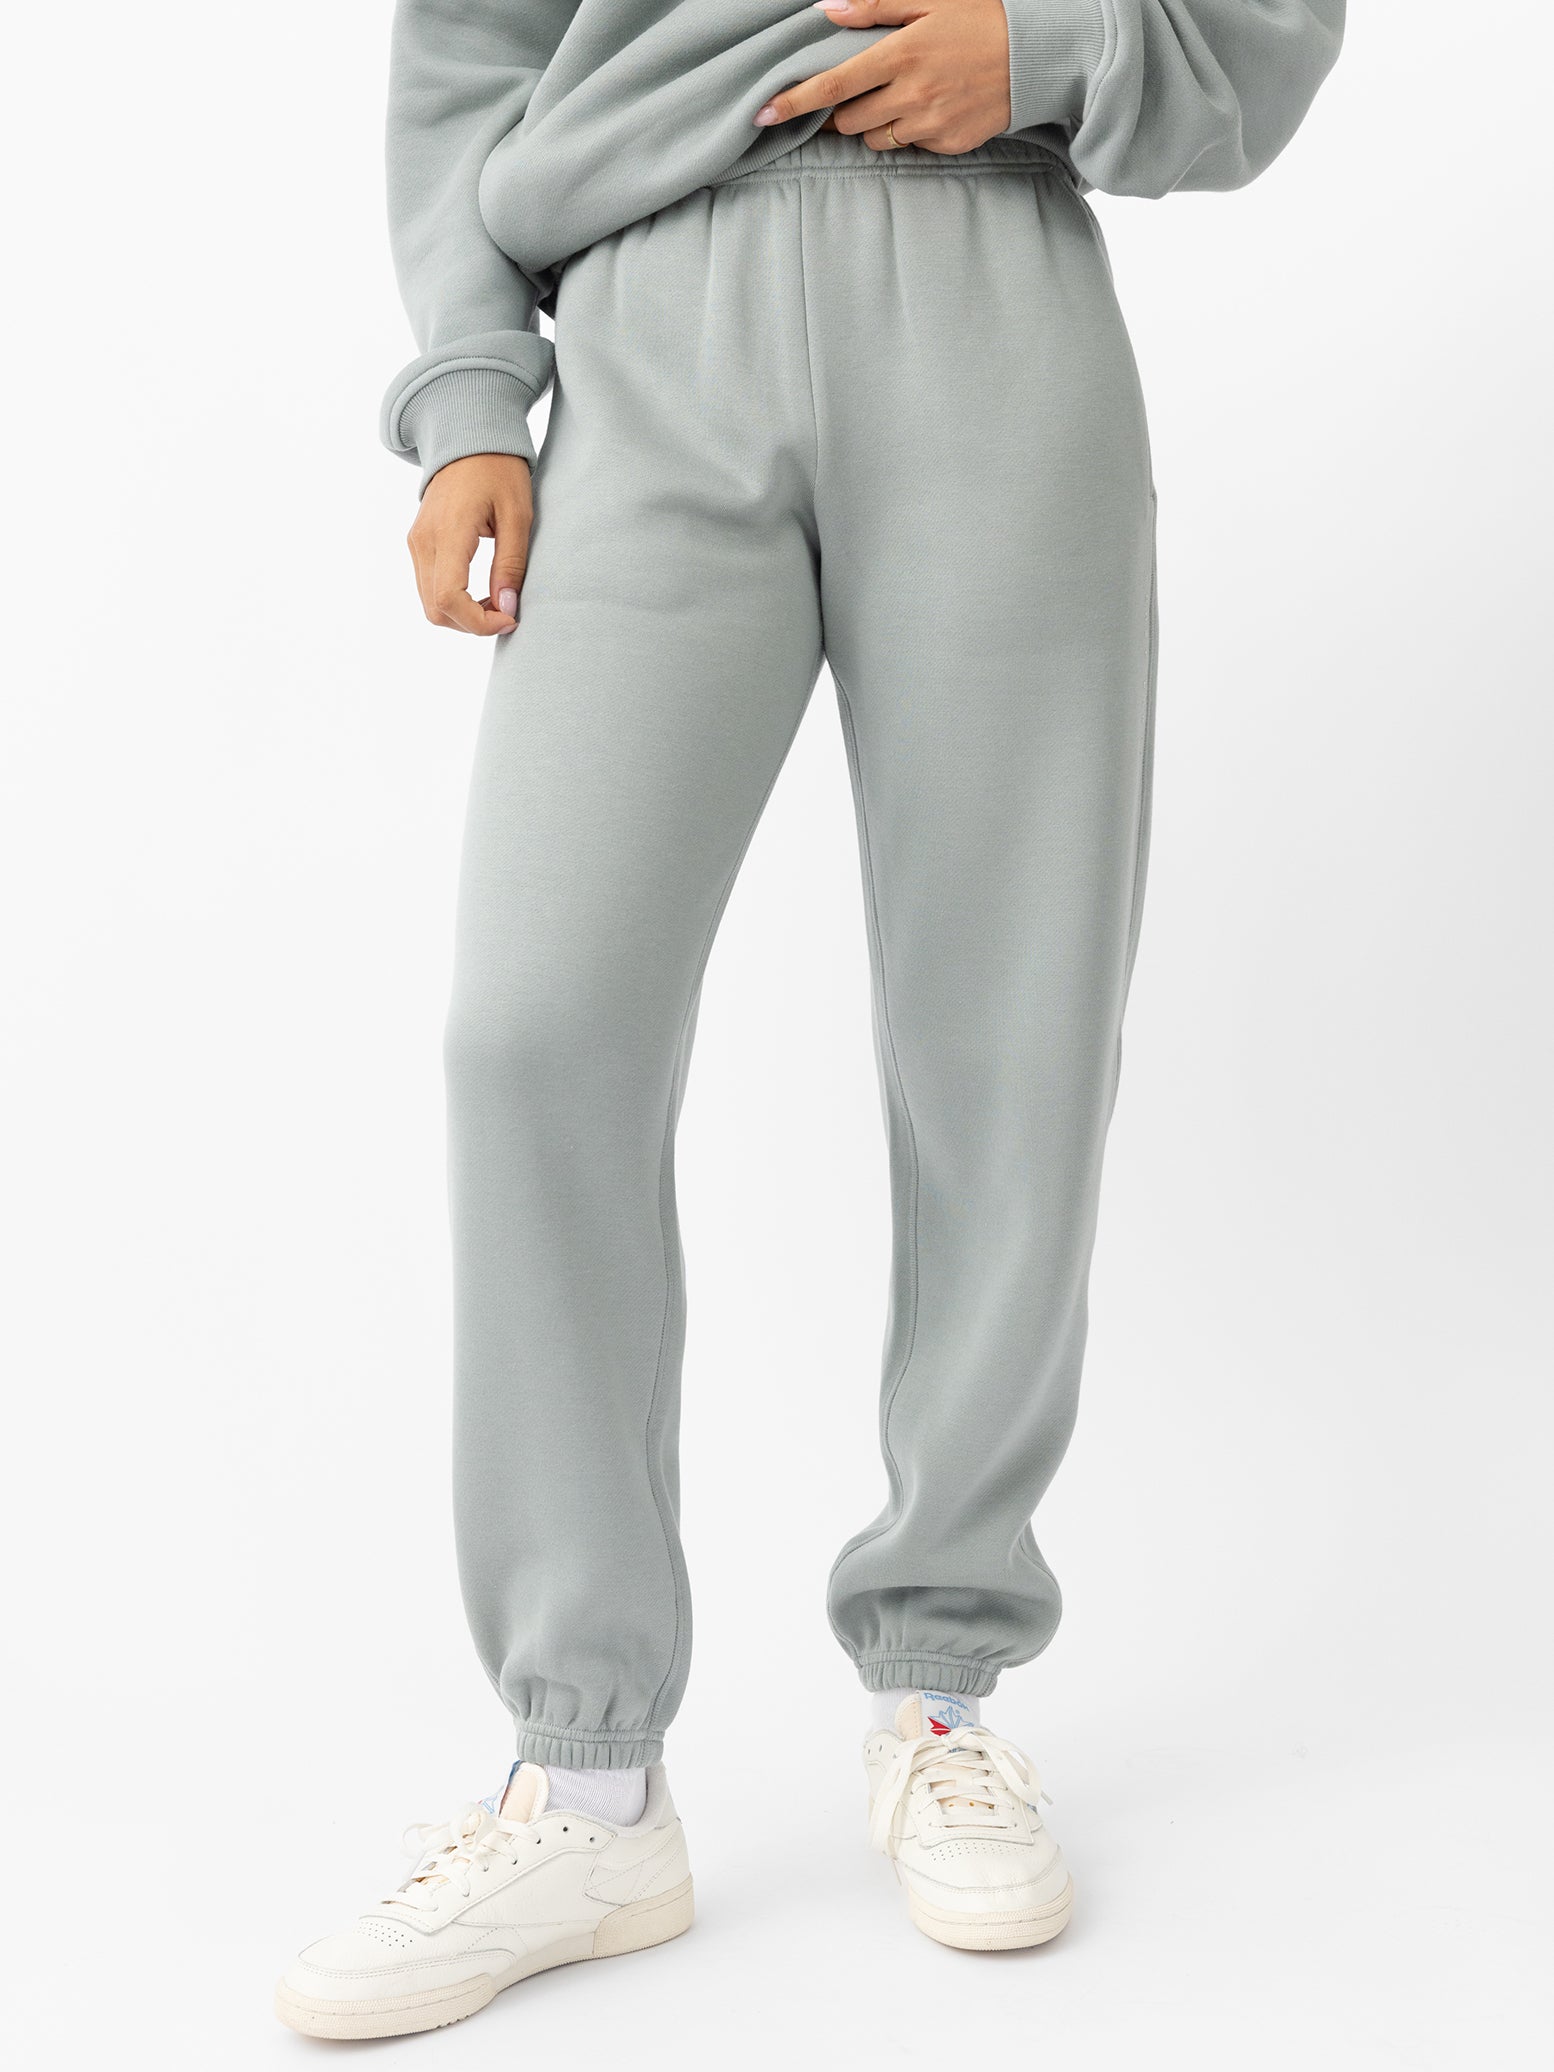 Haze CityScape Joggers. The Joggers are being worn by a female model. The photo is taken with the models hand by the pocket of the joggers. The back ground is a crisp white background. 